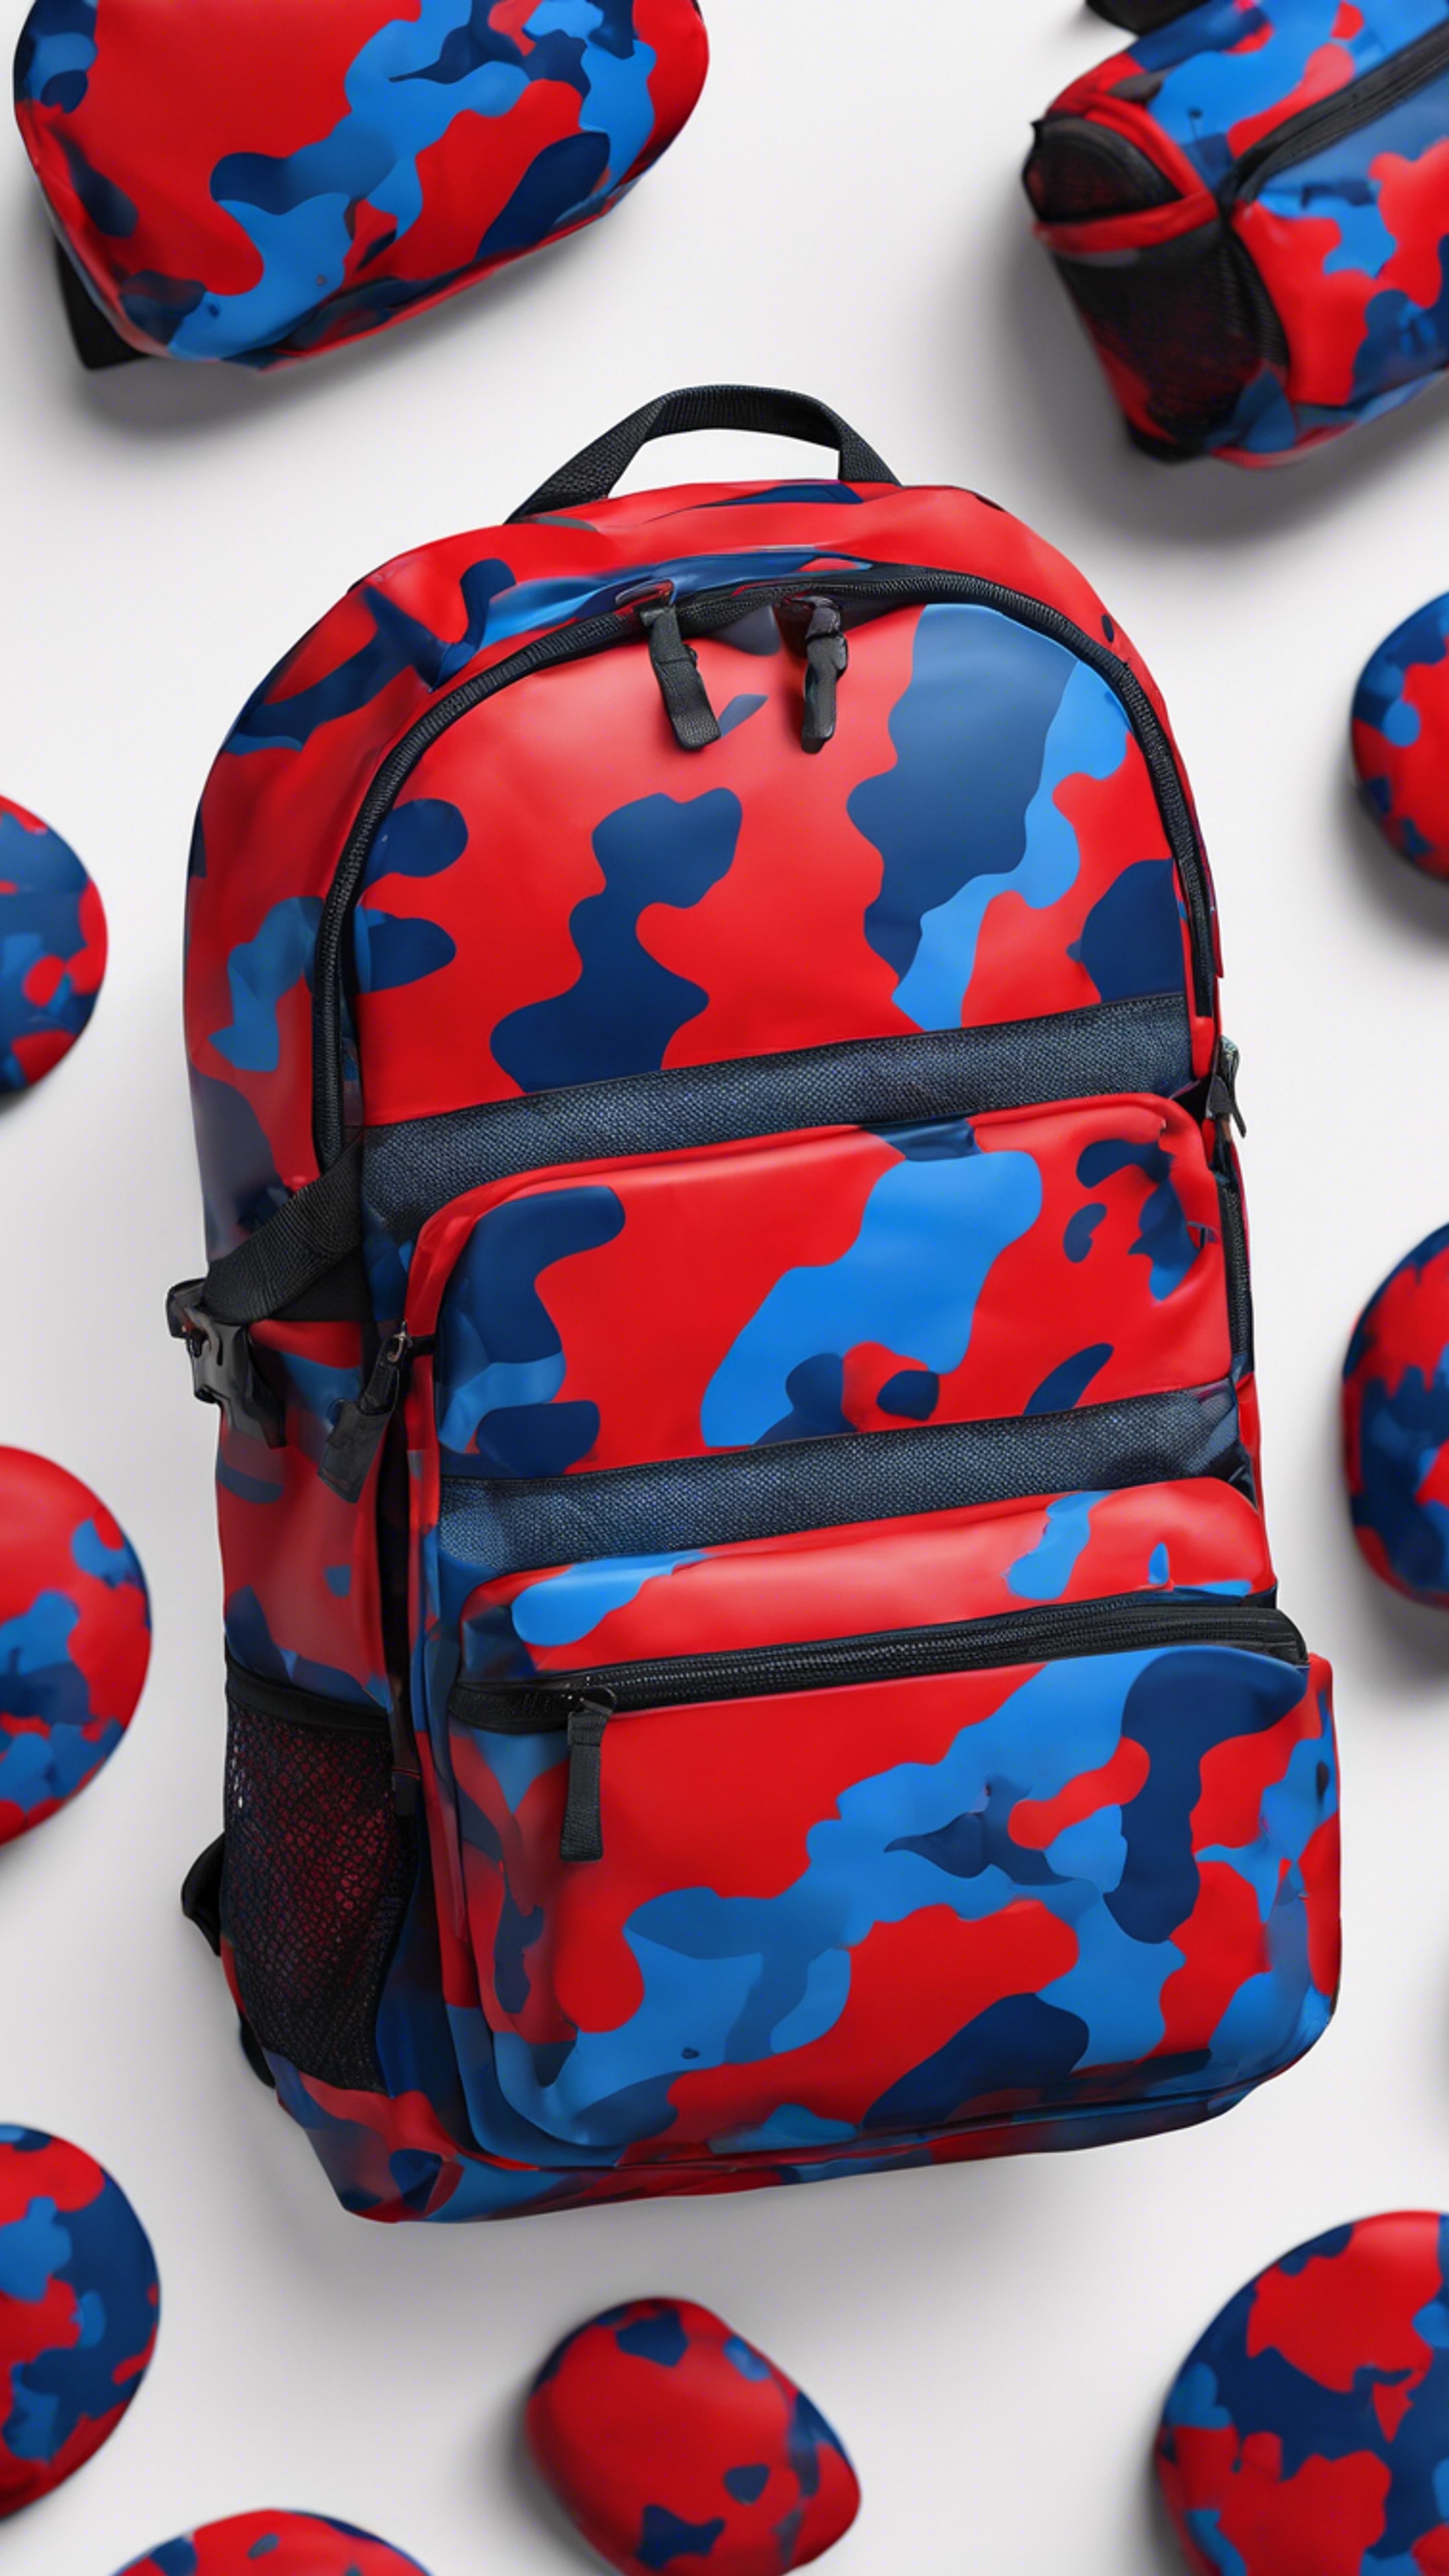 A seamless pattern of red and blue camouflage like on a sports backpack. Tapéta[ebf2c58b20f943e08eab]